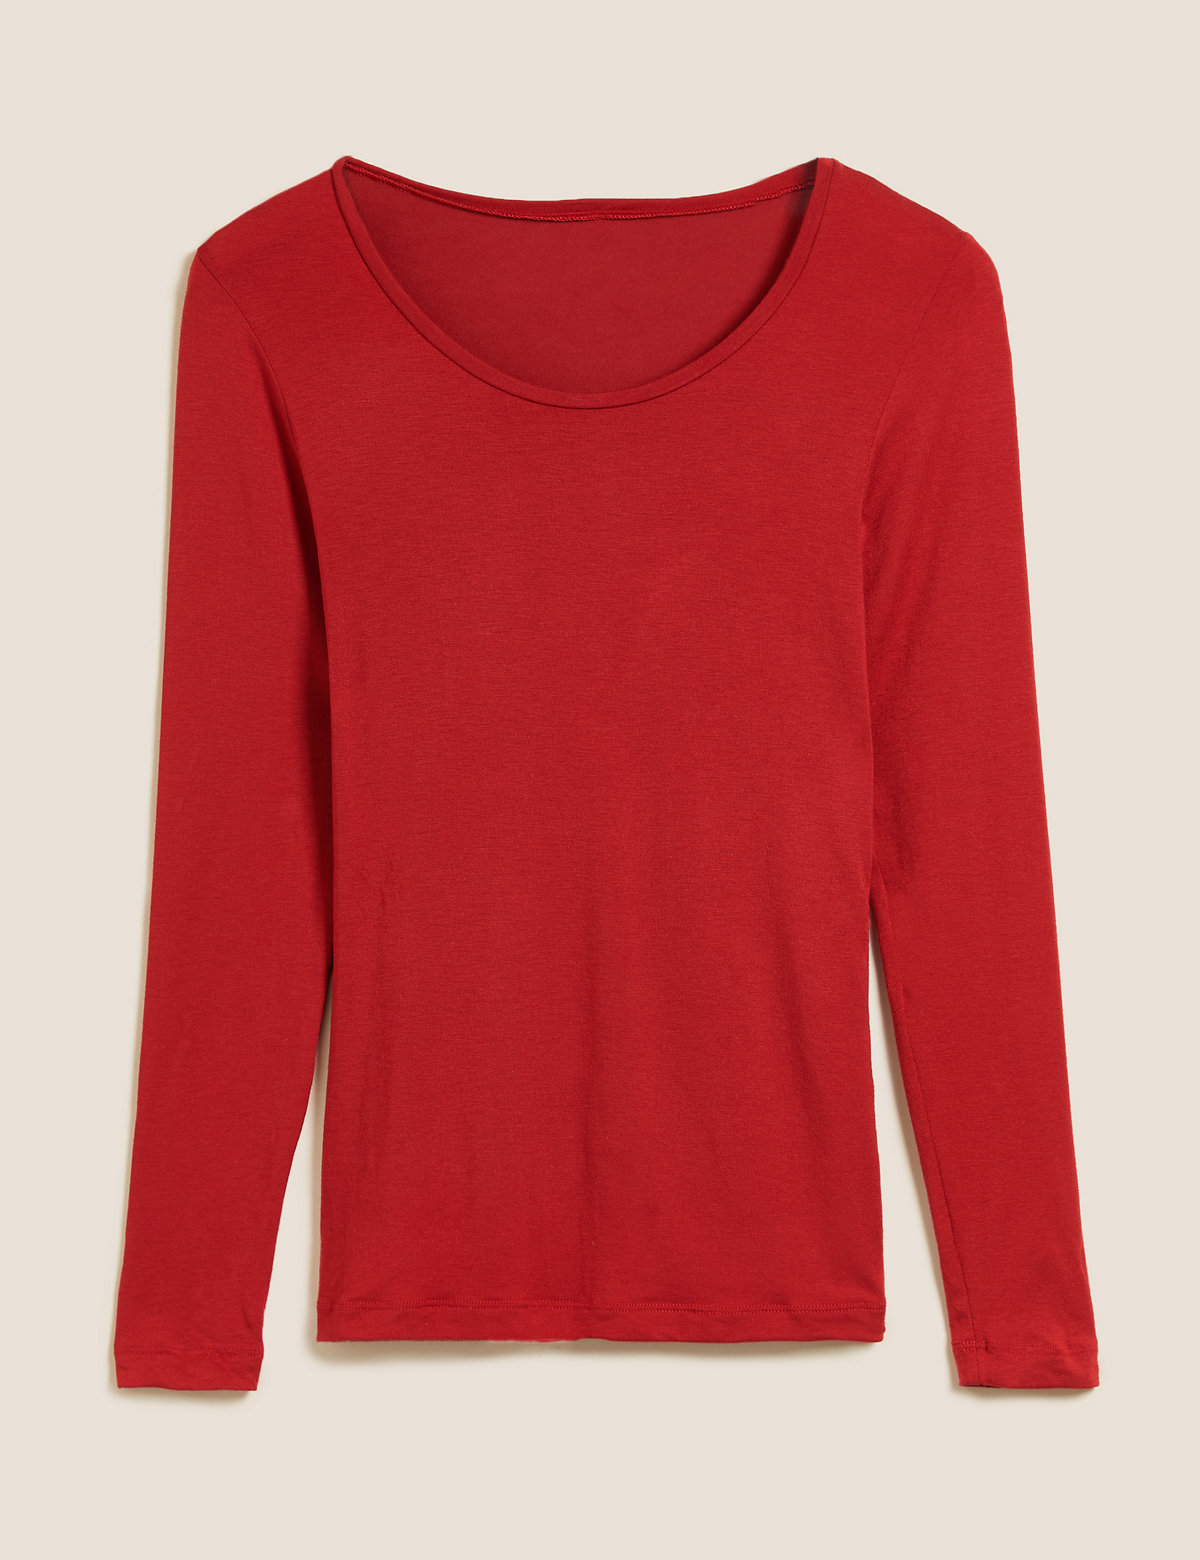 LADIES MARKS & SPENCER M&S COLLECTION HEATGEN THERMAL LONG SLEEVE TOP 6-22 BASE 12 